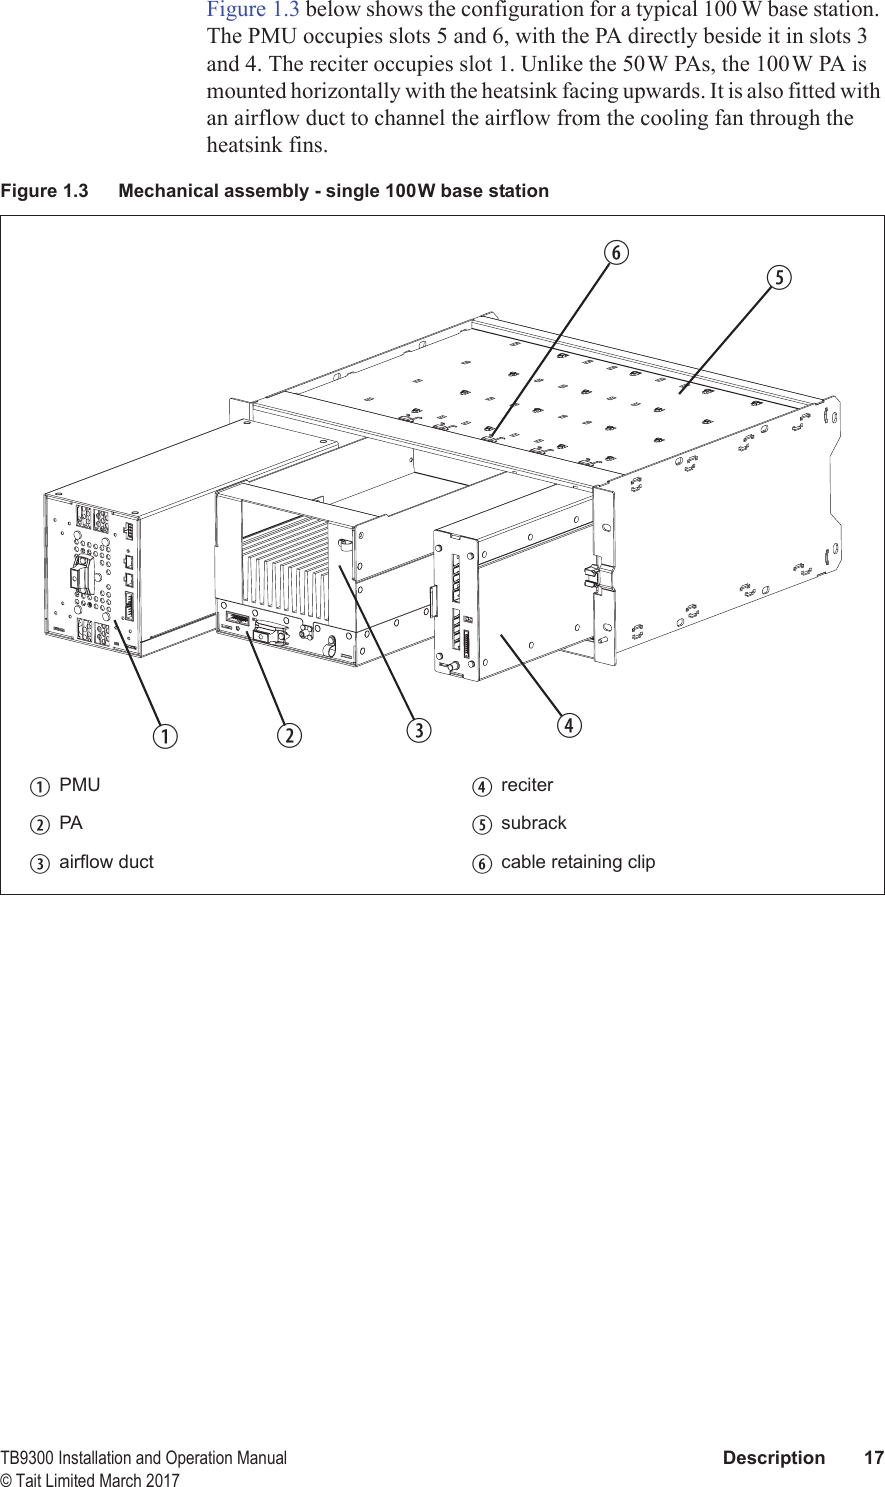  TB9300 Installation and Operation Manual Description 17© Tait Limited March 2017Figure 1.3 below shows the configuration for a typical 100 W base station. The PMU occupies slots 5 and 6, with the PA directly beside it in slots 3 and 4. The reciter occupies slot 1. Unlike the 50W PAs, the 100W PA is mounted horizontally with the heatsink facing upwards. It is also fitted with an airflow duct to channel the airflow from the cooling fan through the heatsink fins.Figure 1.3 Mechanical assembly - single 100W base stationbPMU erecitercPA fsubrackdairflow duct gcable retaining clipbcdefg